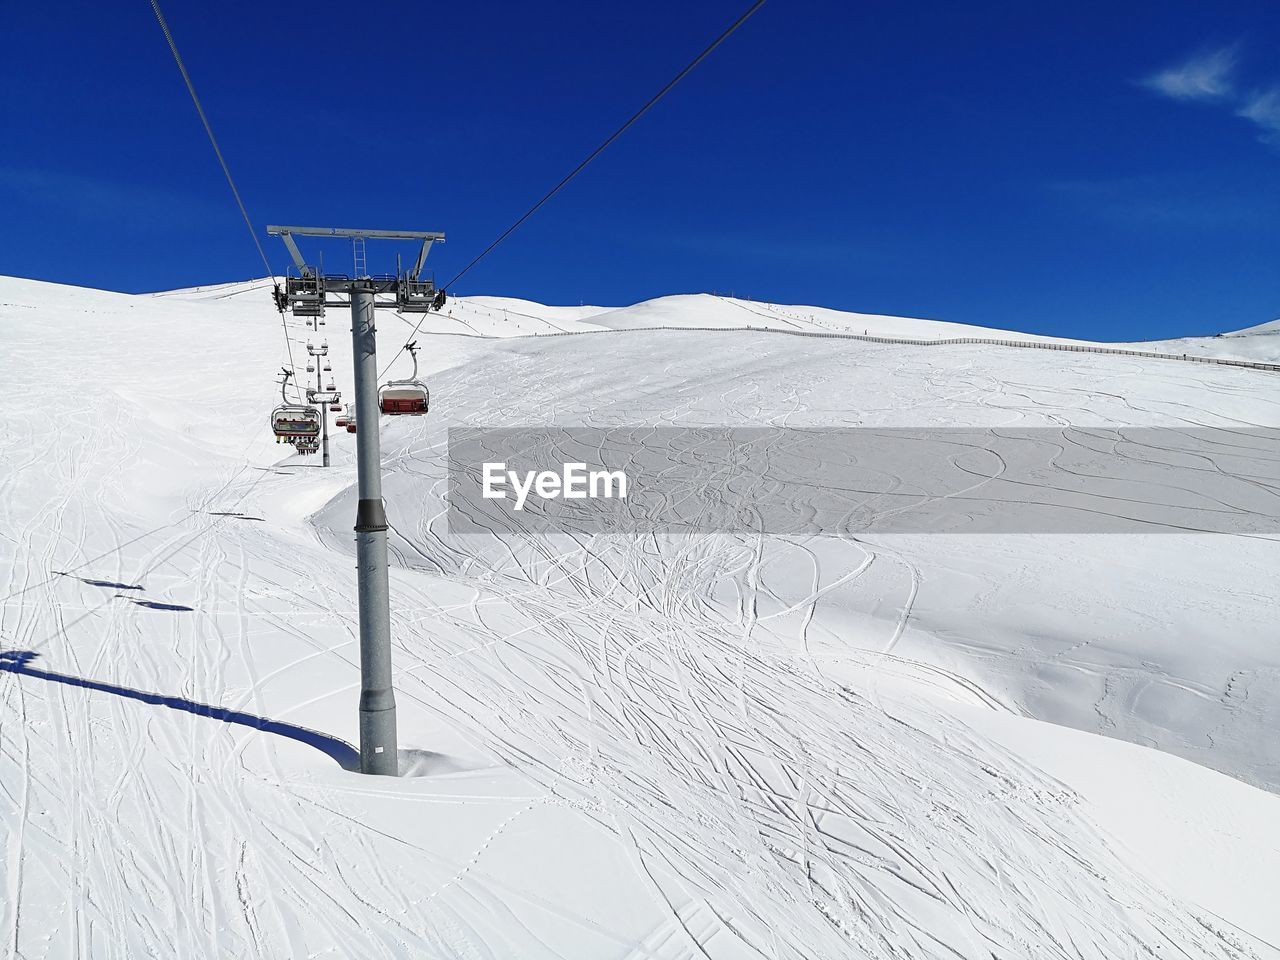 snow, piste, winter, cold temperature, skiing, mountain, landscape, ski lift, environment, ski equipment, nature, sky, scenics - nature, ski, cable, cable car, beauty in nature, white, blue, ski mountaineering, day, travel, mountain range, electricity, transportation, winter sports, non-urban scene, technology, ski touring, land, sports, ski track, sports equipment, downhill, outdoors, sunlight, overhead cable car, tranquility, vacation, tranquil scene, clear sky, nordic skiing, travel destinations, snowcapped mountain, pole, remote, holiday, communication, trip, sunny, sign